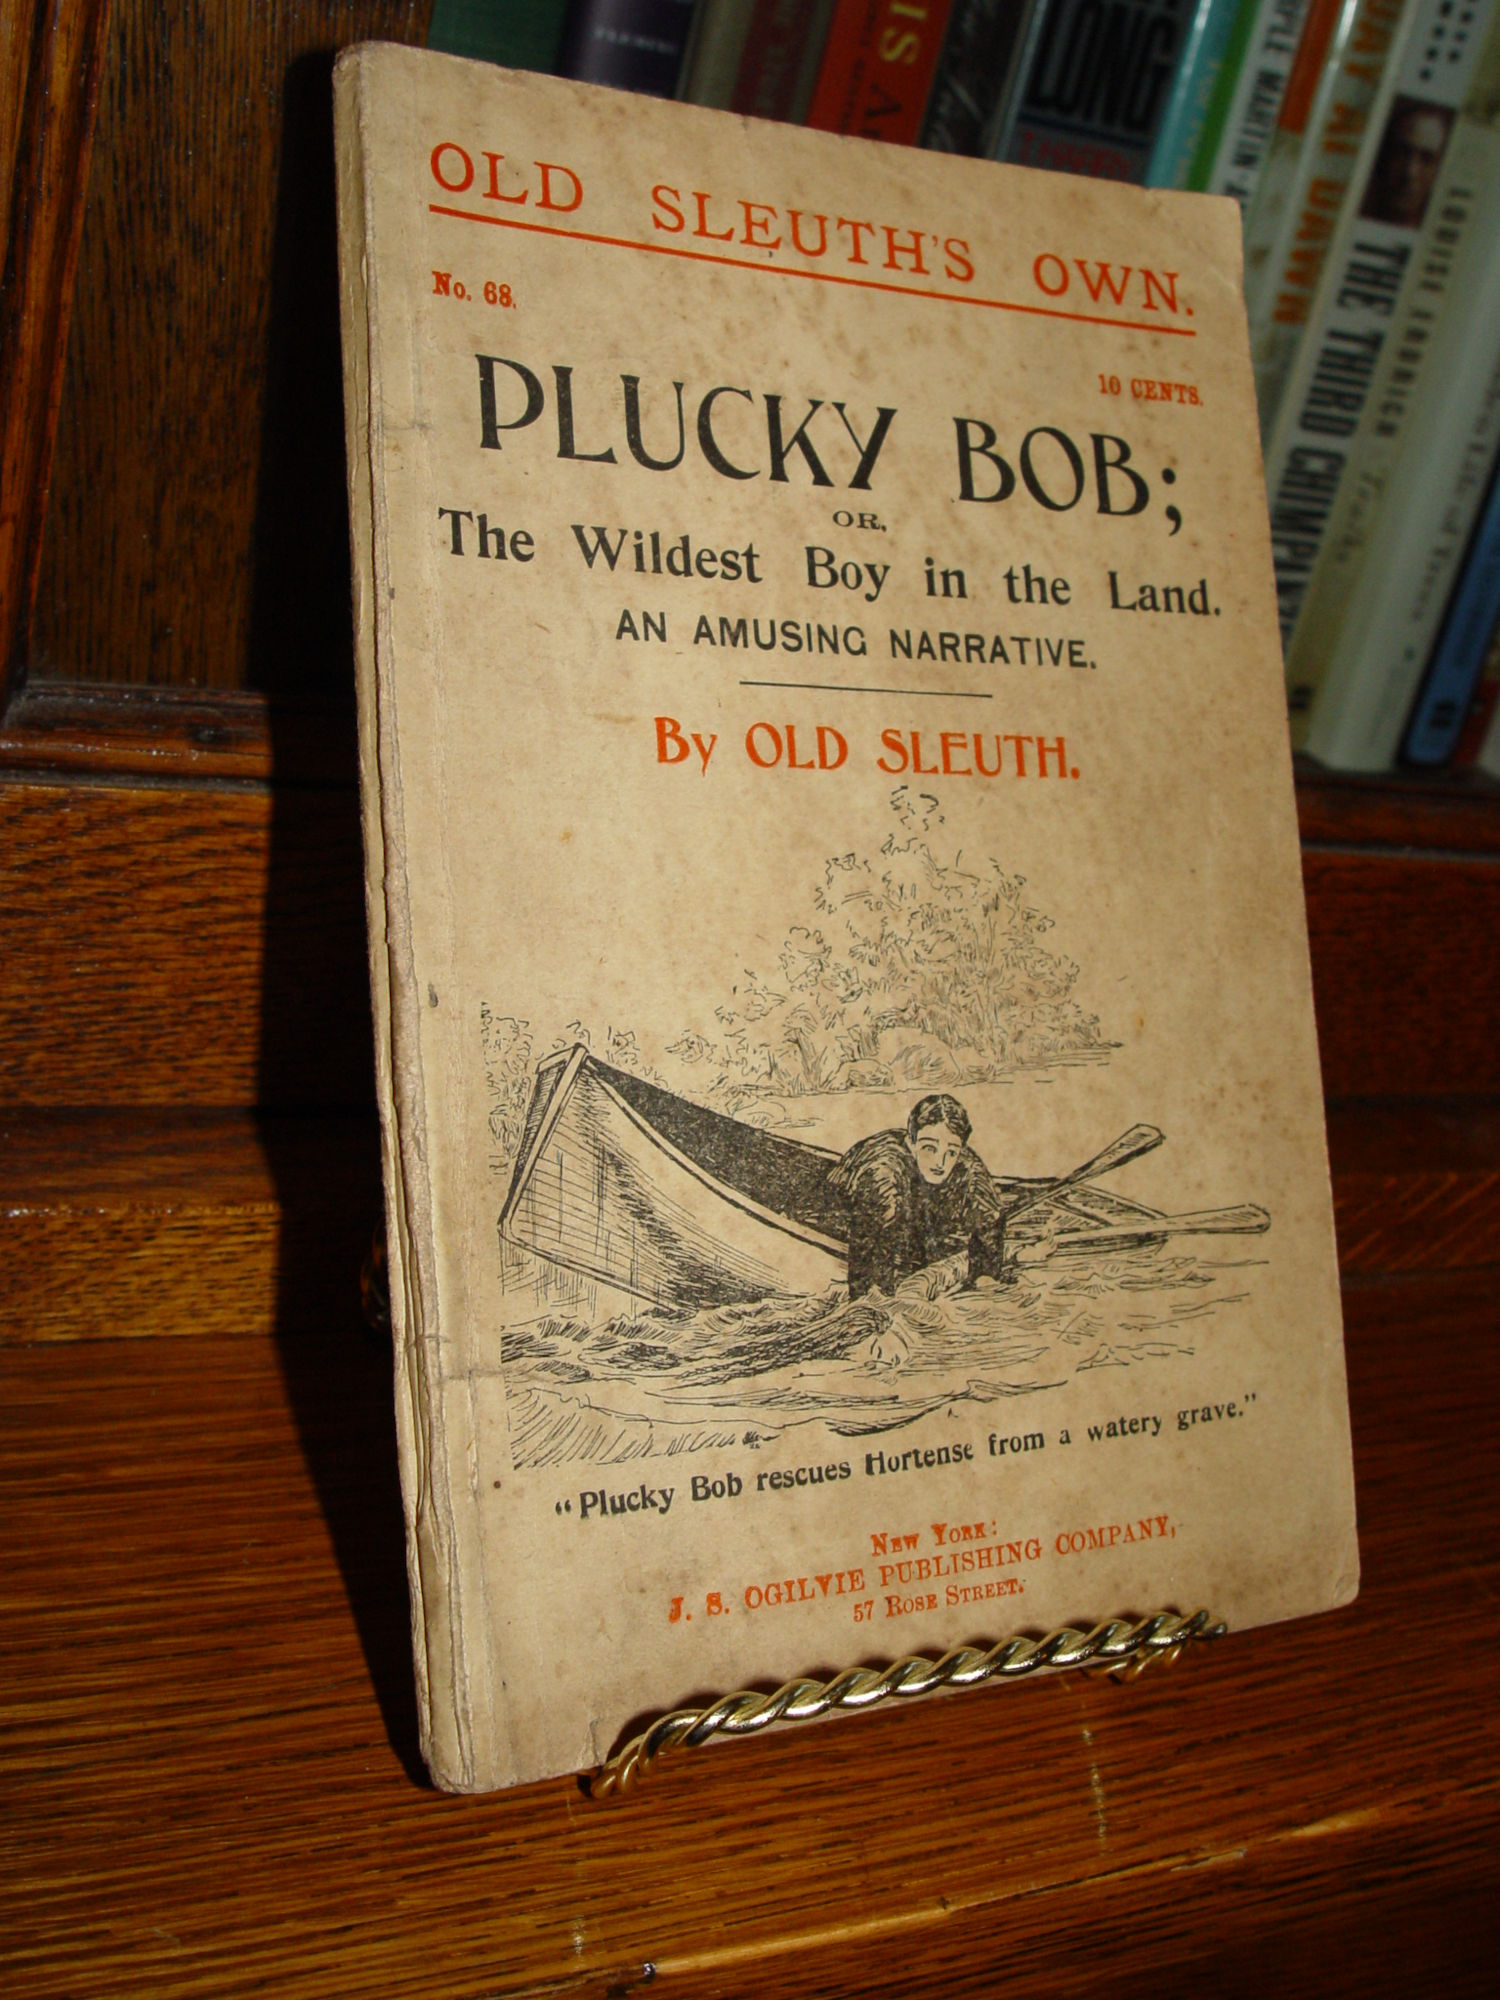 Plucky Bob; or, The Wildest Boy in the Land
                        No 68 1896 Old Sleuth's Own